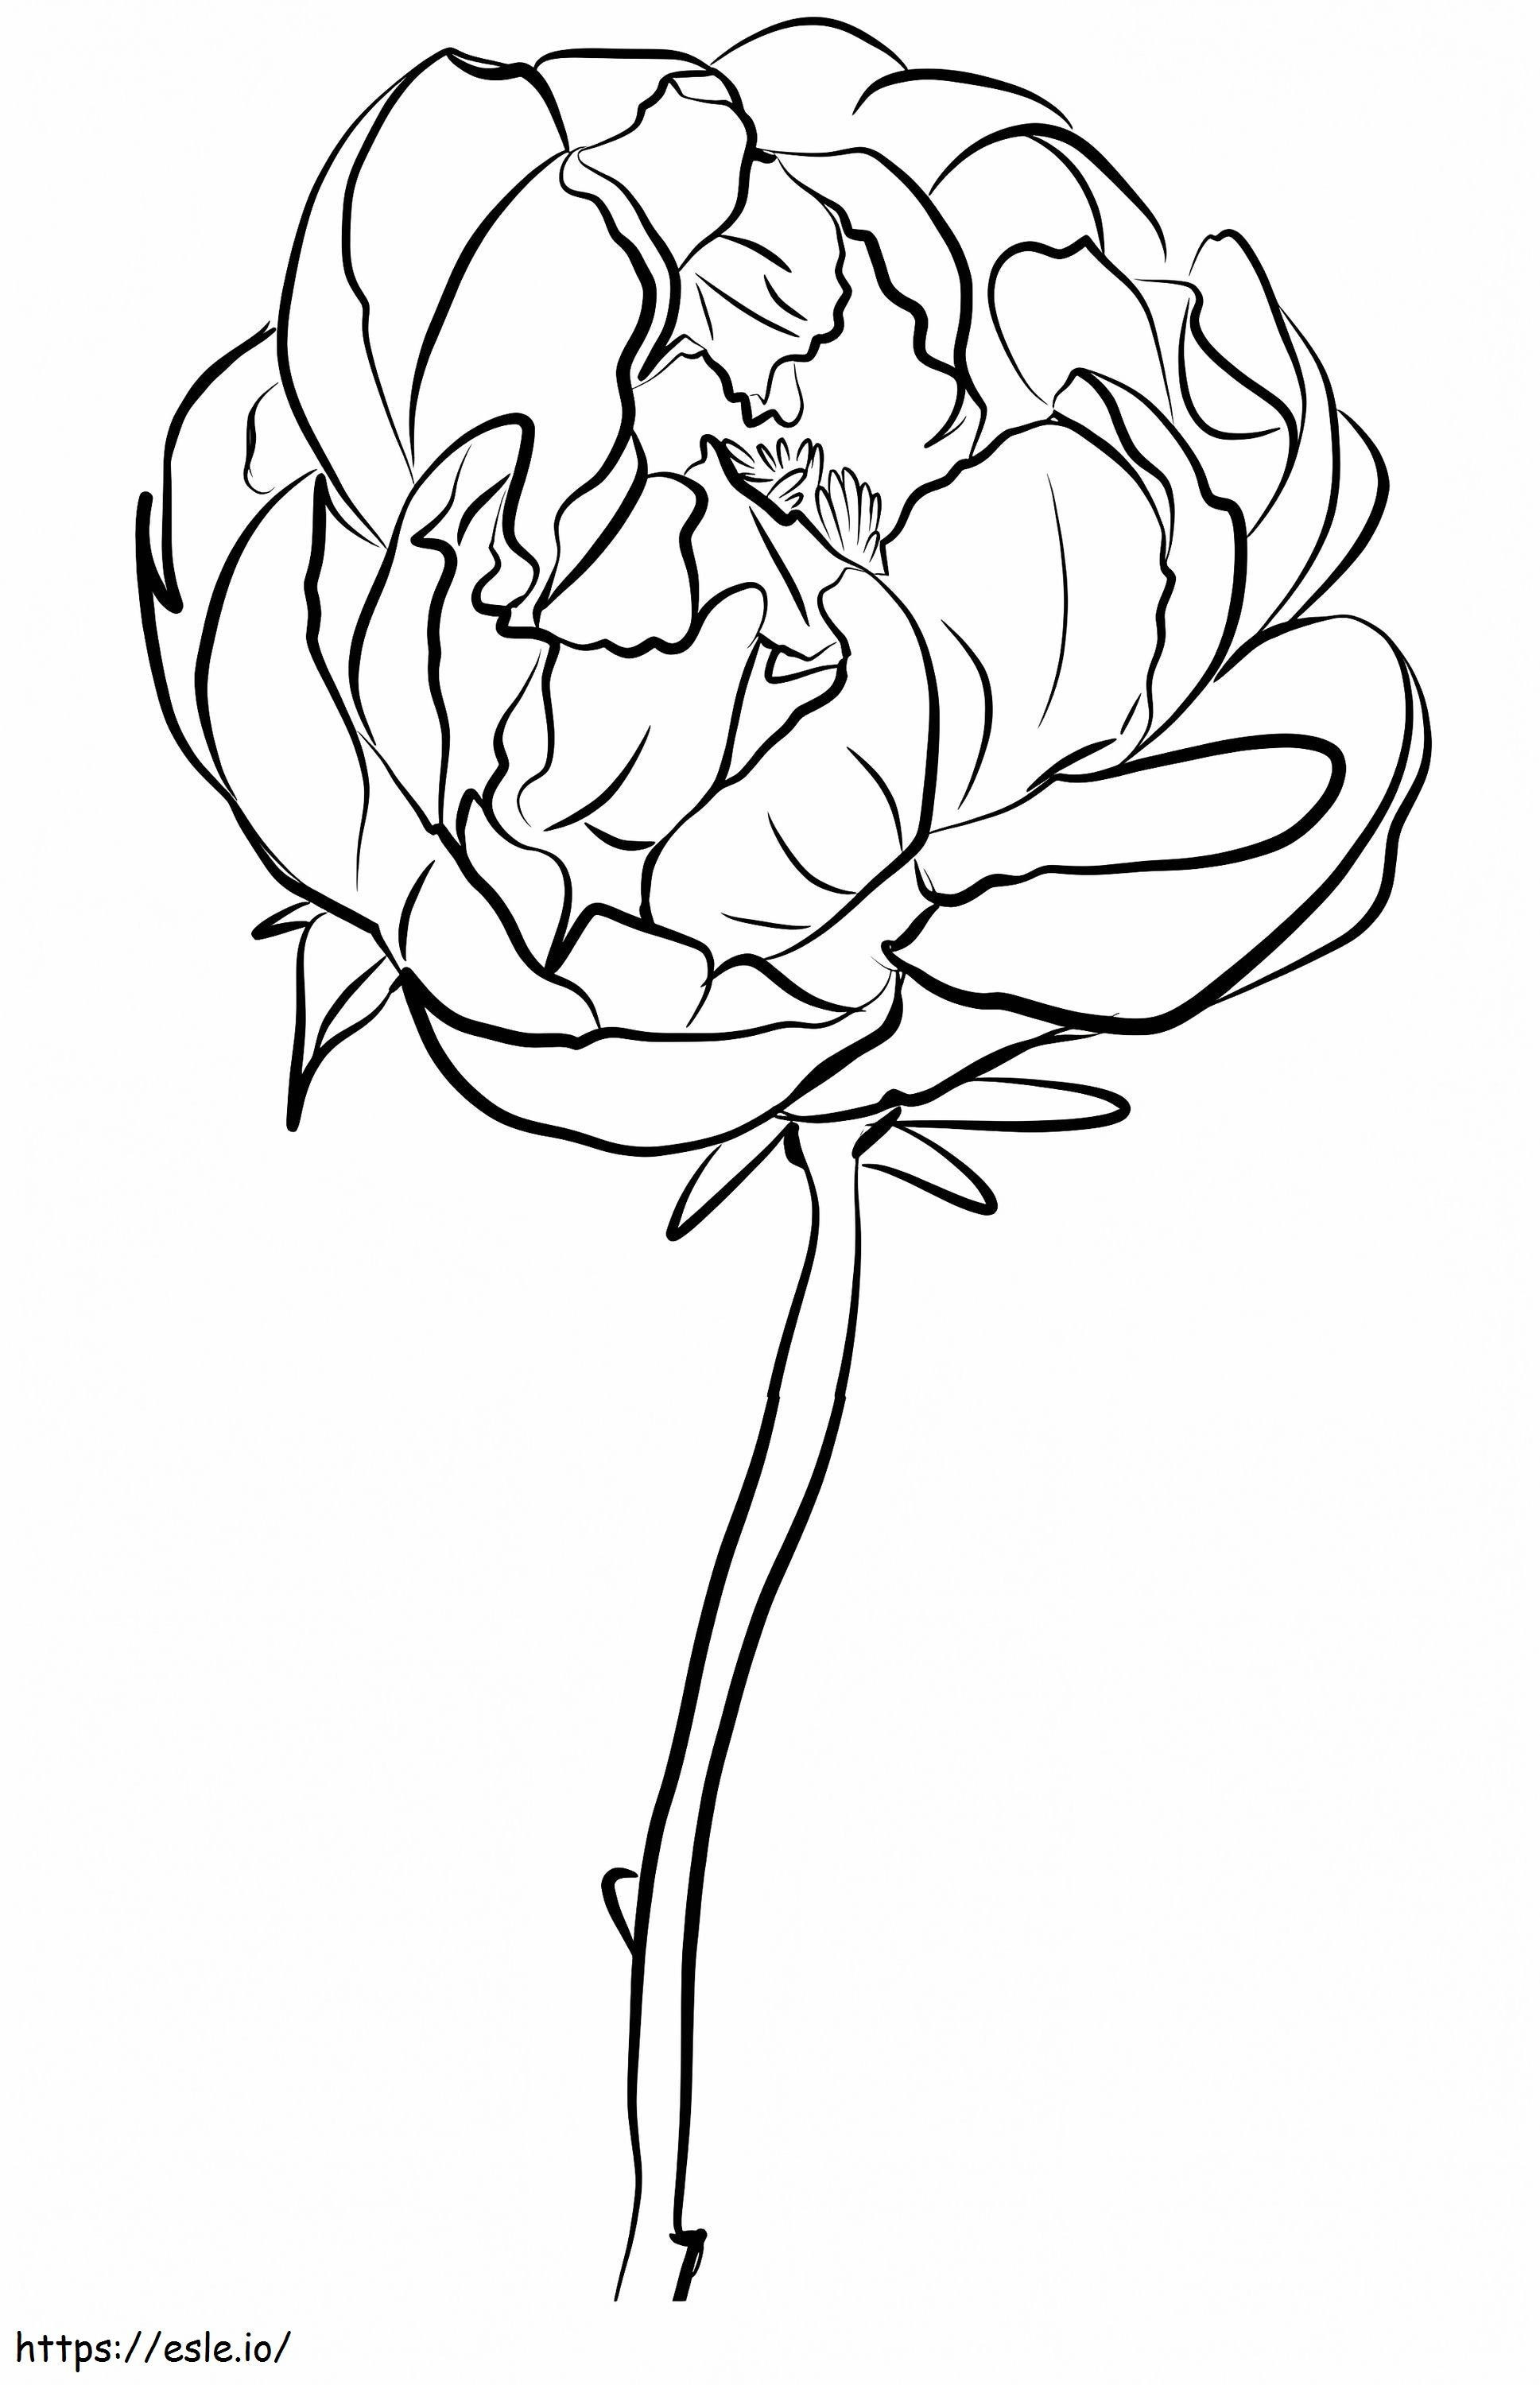 1559958612_A Peony coloring page